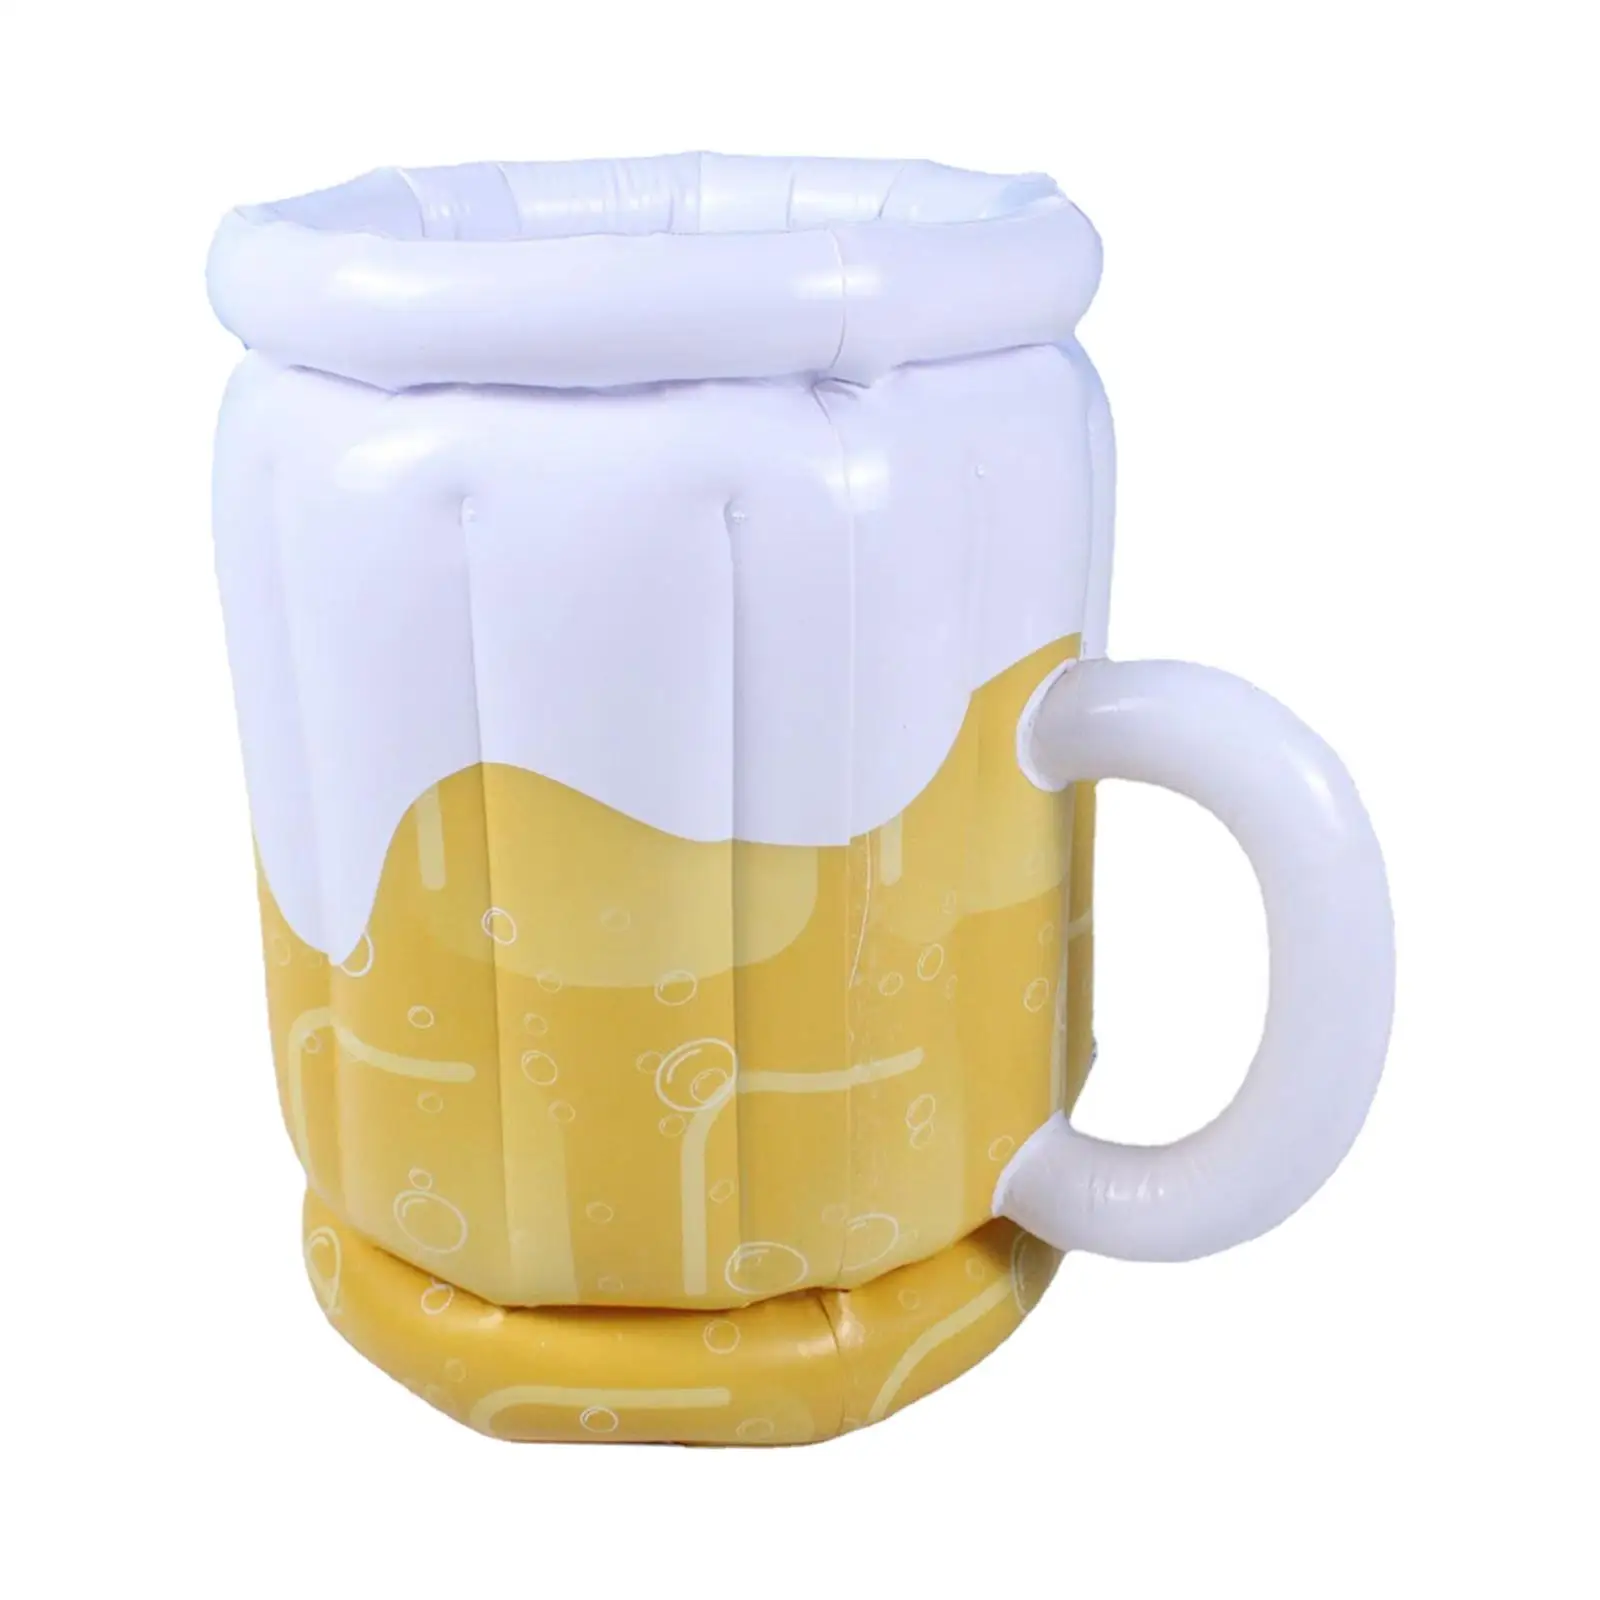 Inflatable Beer Mug Cooler Buffet Cooler Portable Drink Cooler Ice Bucket for Pool Party Decorations BBQ Picnic Camping Outdoor